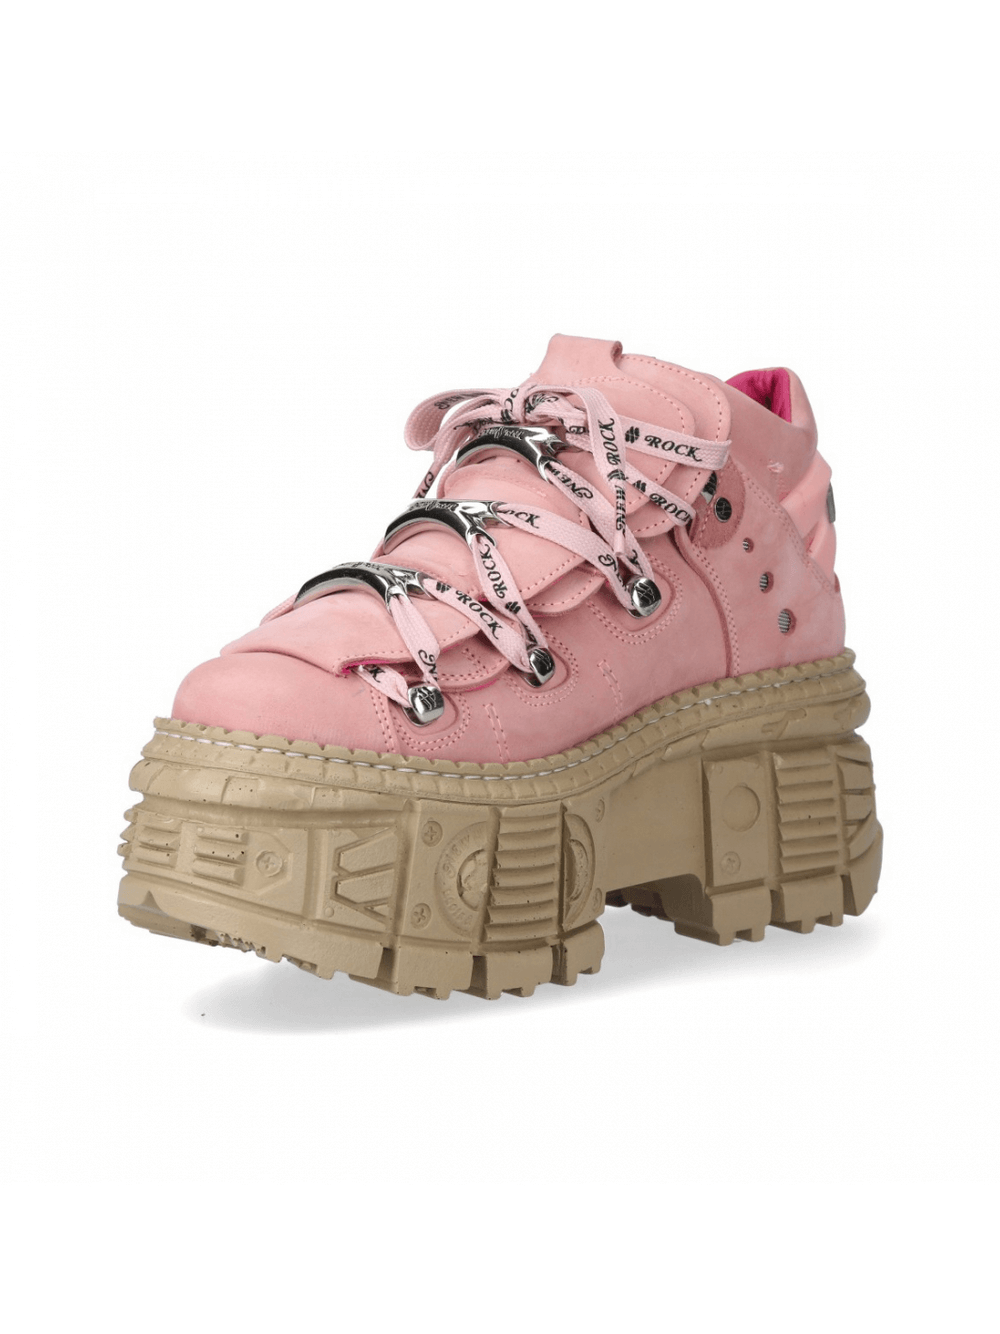 NEW ROCK Pink Rocker Ankle Boots with Chunky Soles